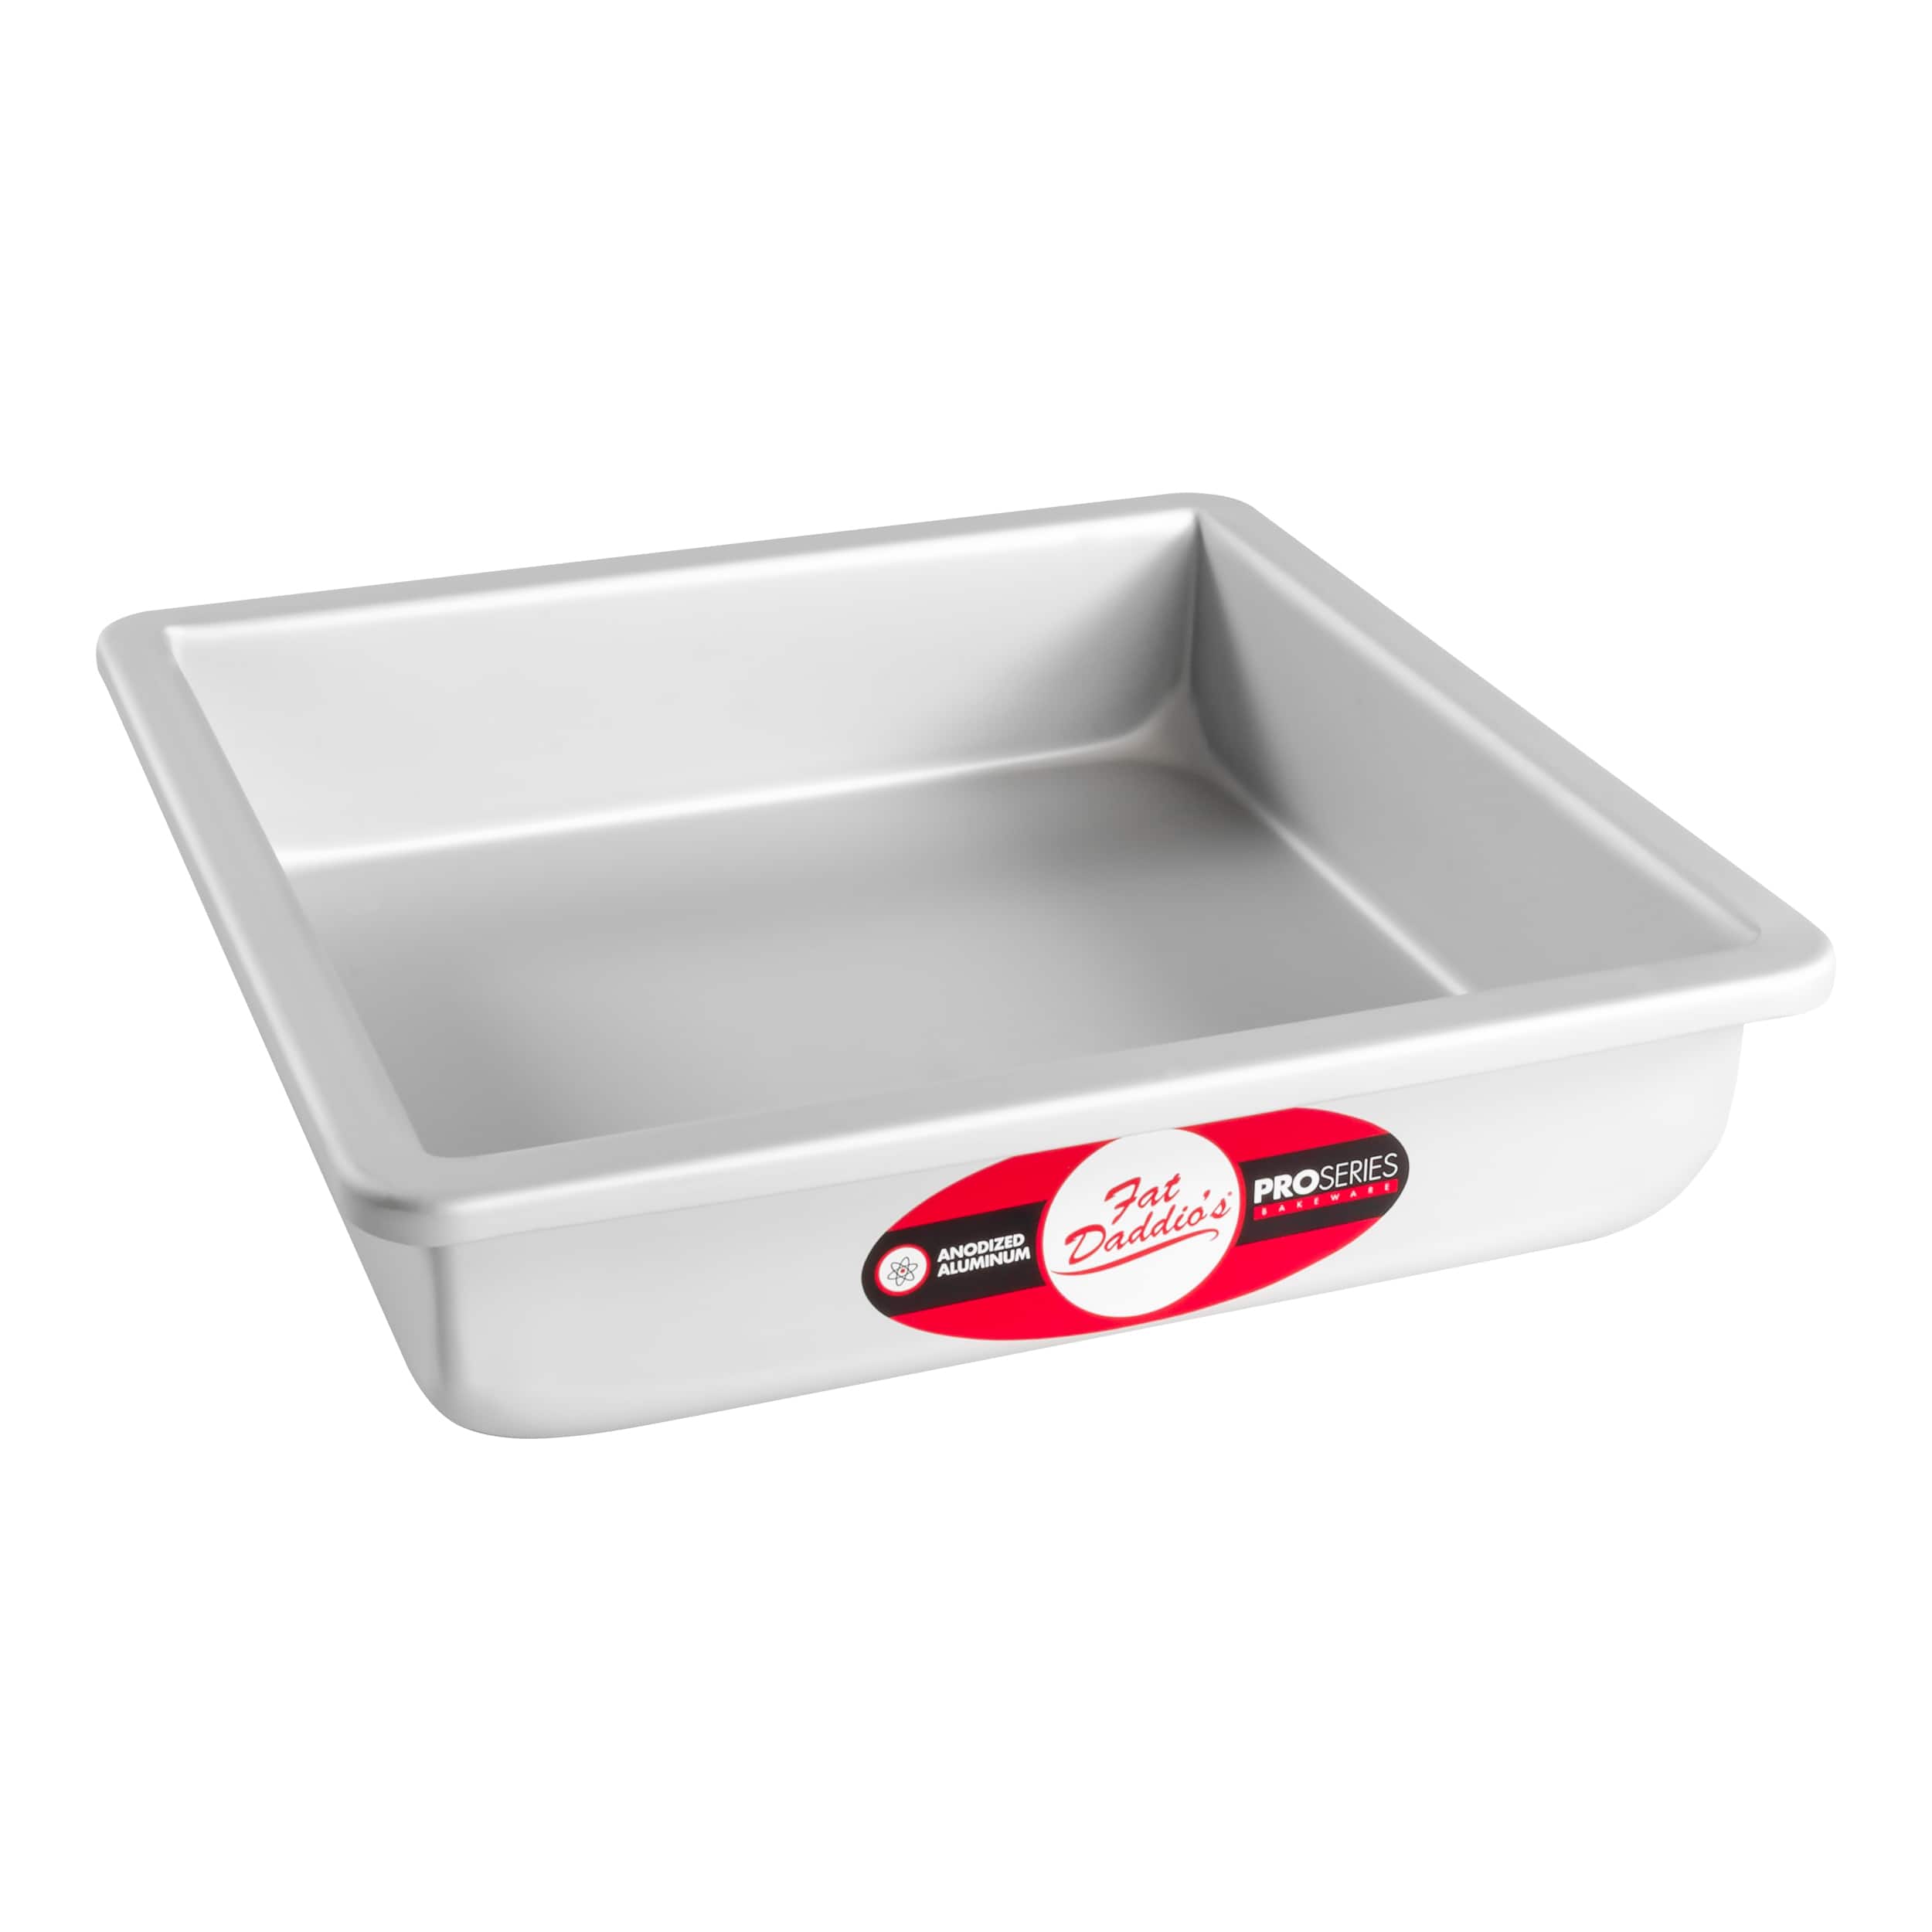 Good Cook 04017 786173391991 8 Inch x 8 Inch Square Cake Pan, 8 x 8 Inch,  Grey